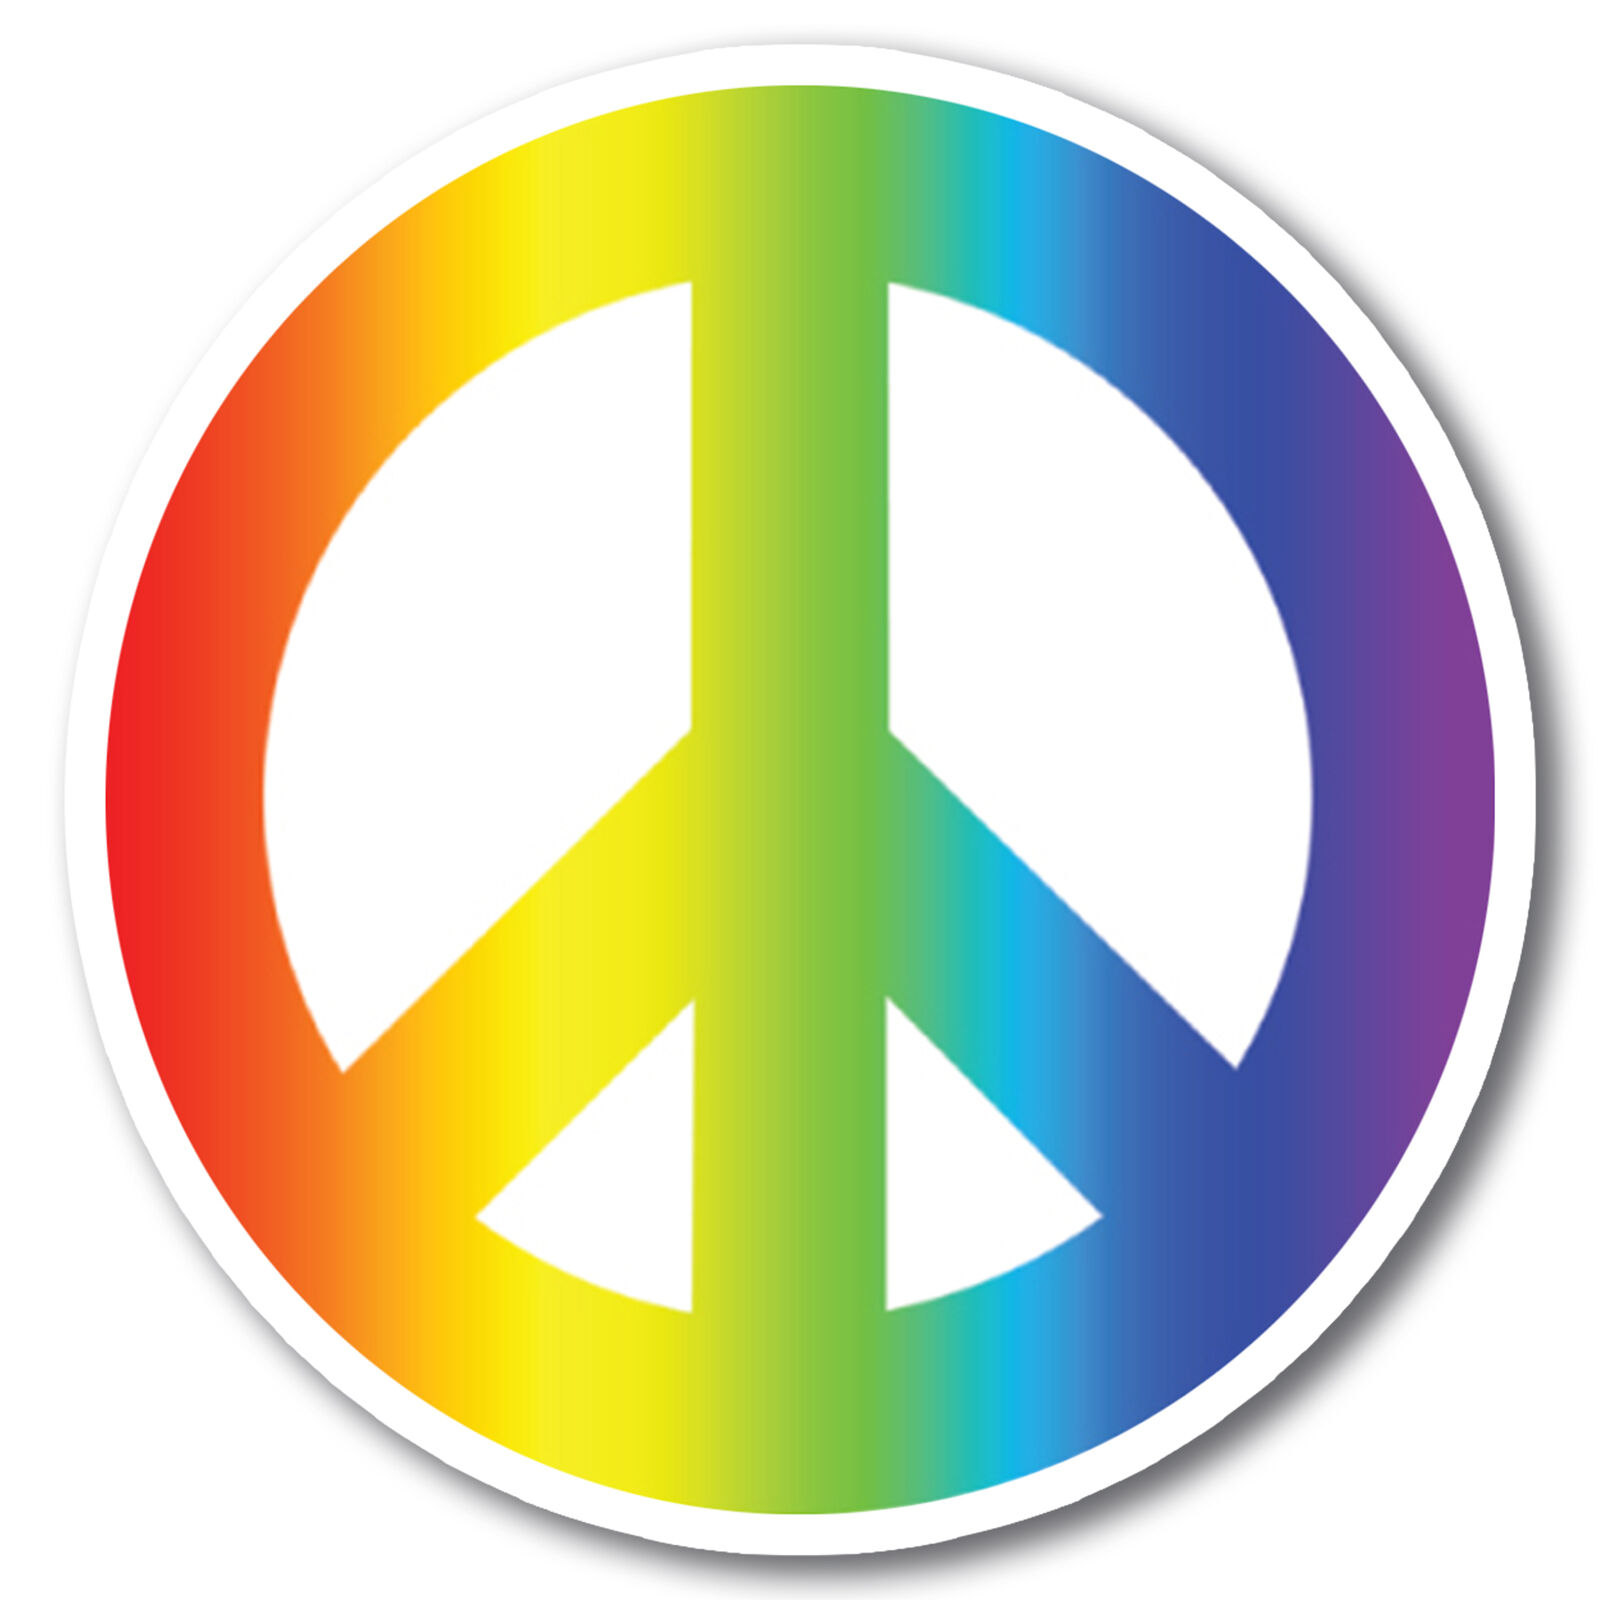 Magnet Me Up Peace Sign Magnet Decal, 5 In Round, Muti-color, Automotive Magnet